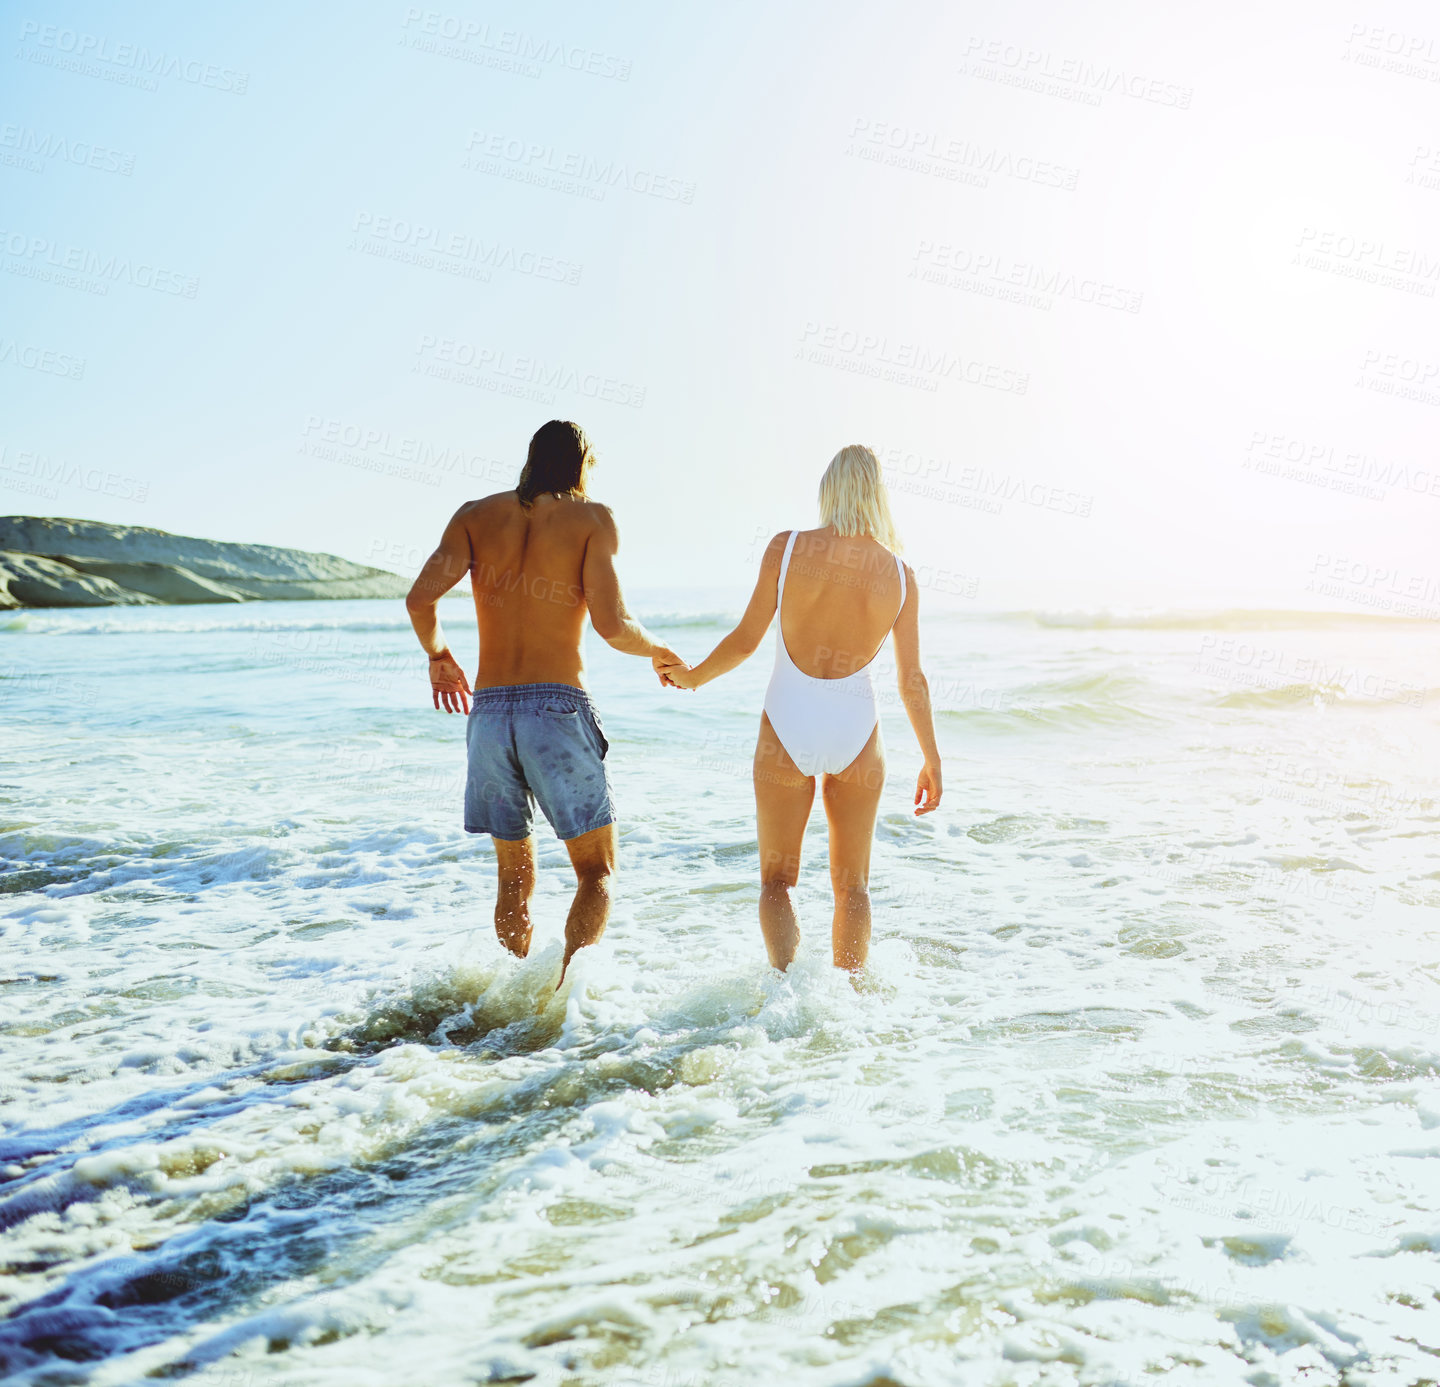 Buy stock photo Rearview shot of a young couple enjoying some quality time together at the beach